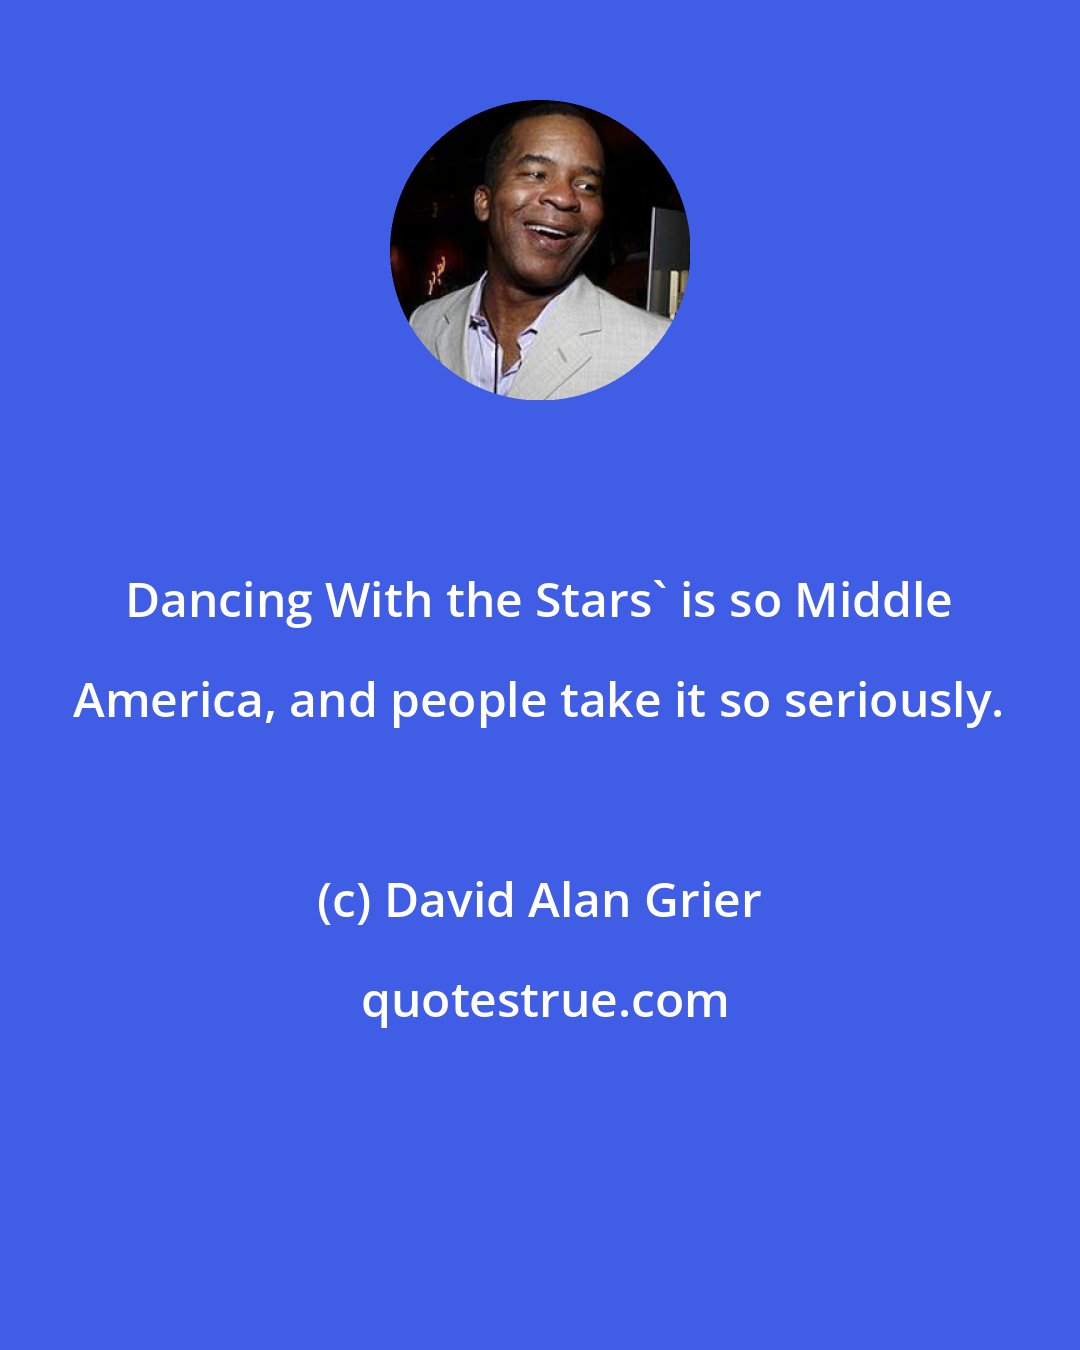 David Alan Grier: Dancing With the Stars' is so Middle America, and people take it so seriously.